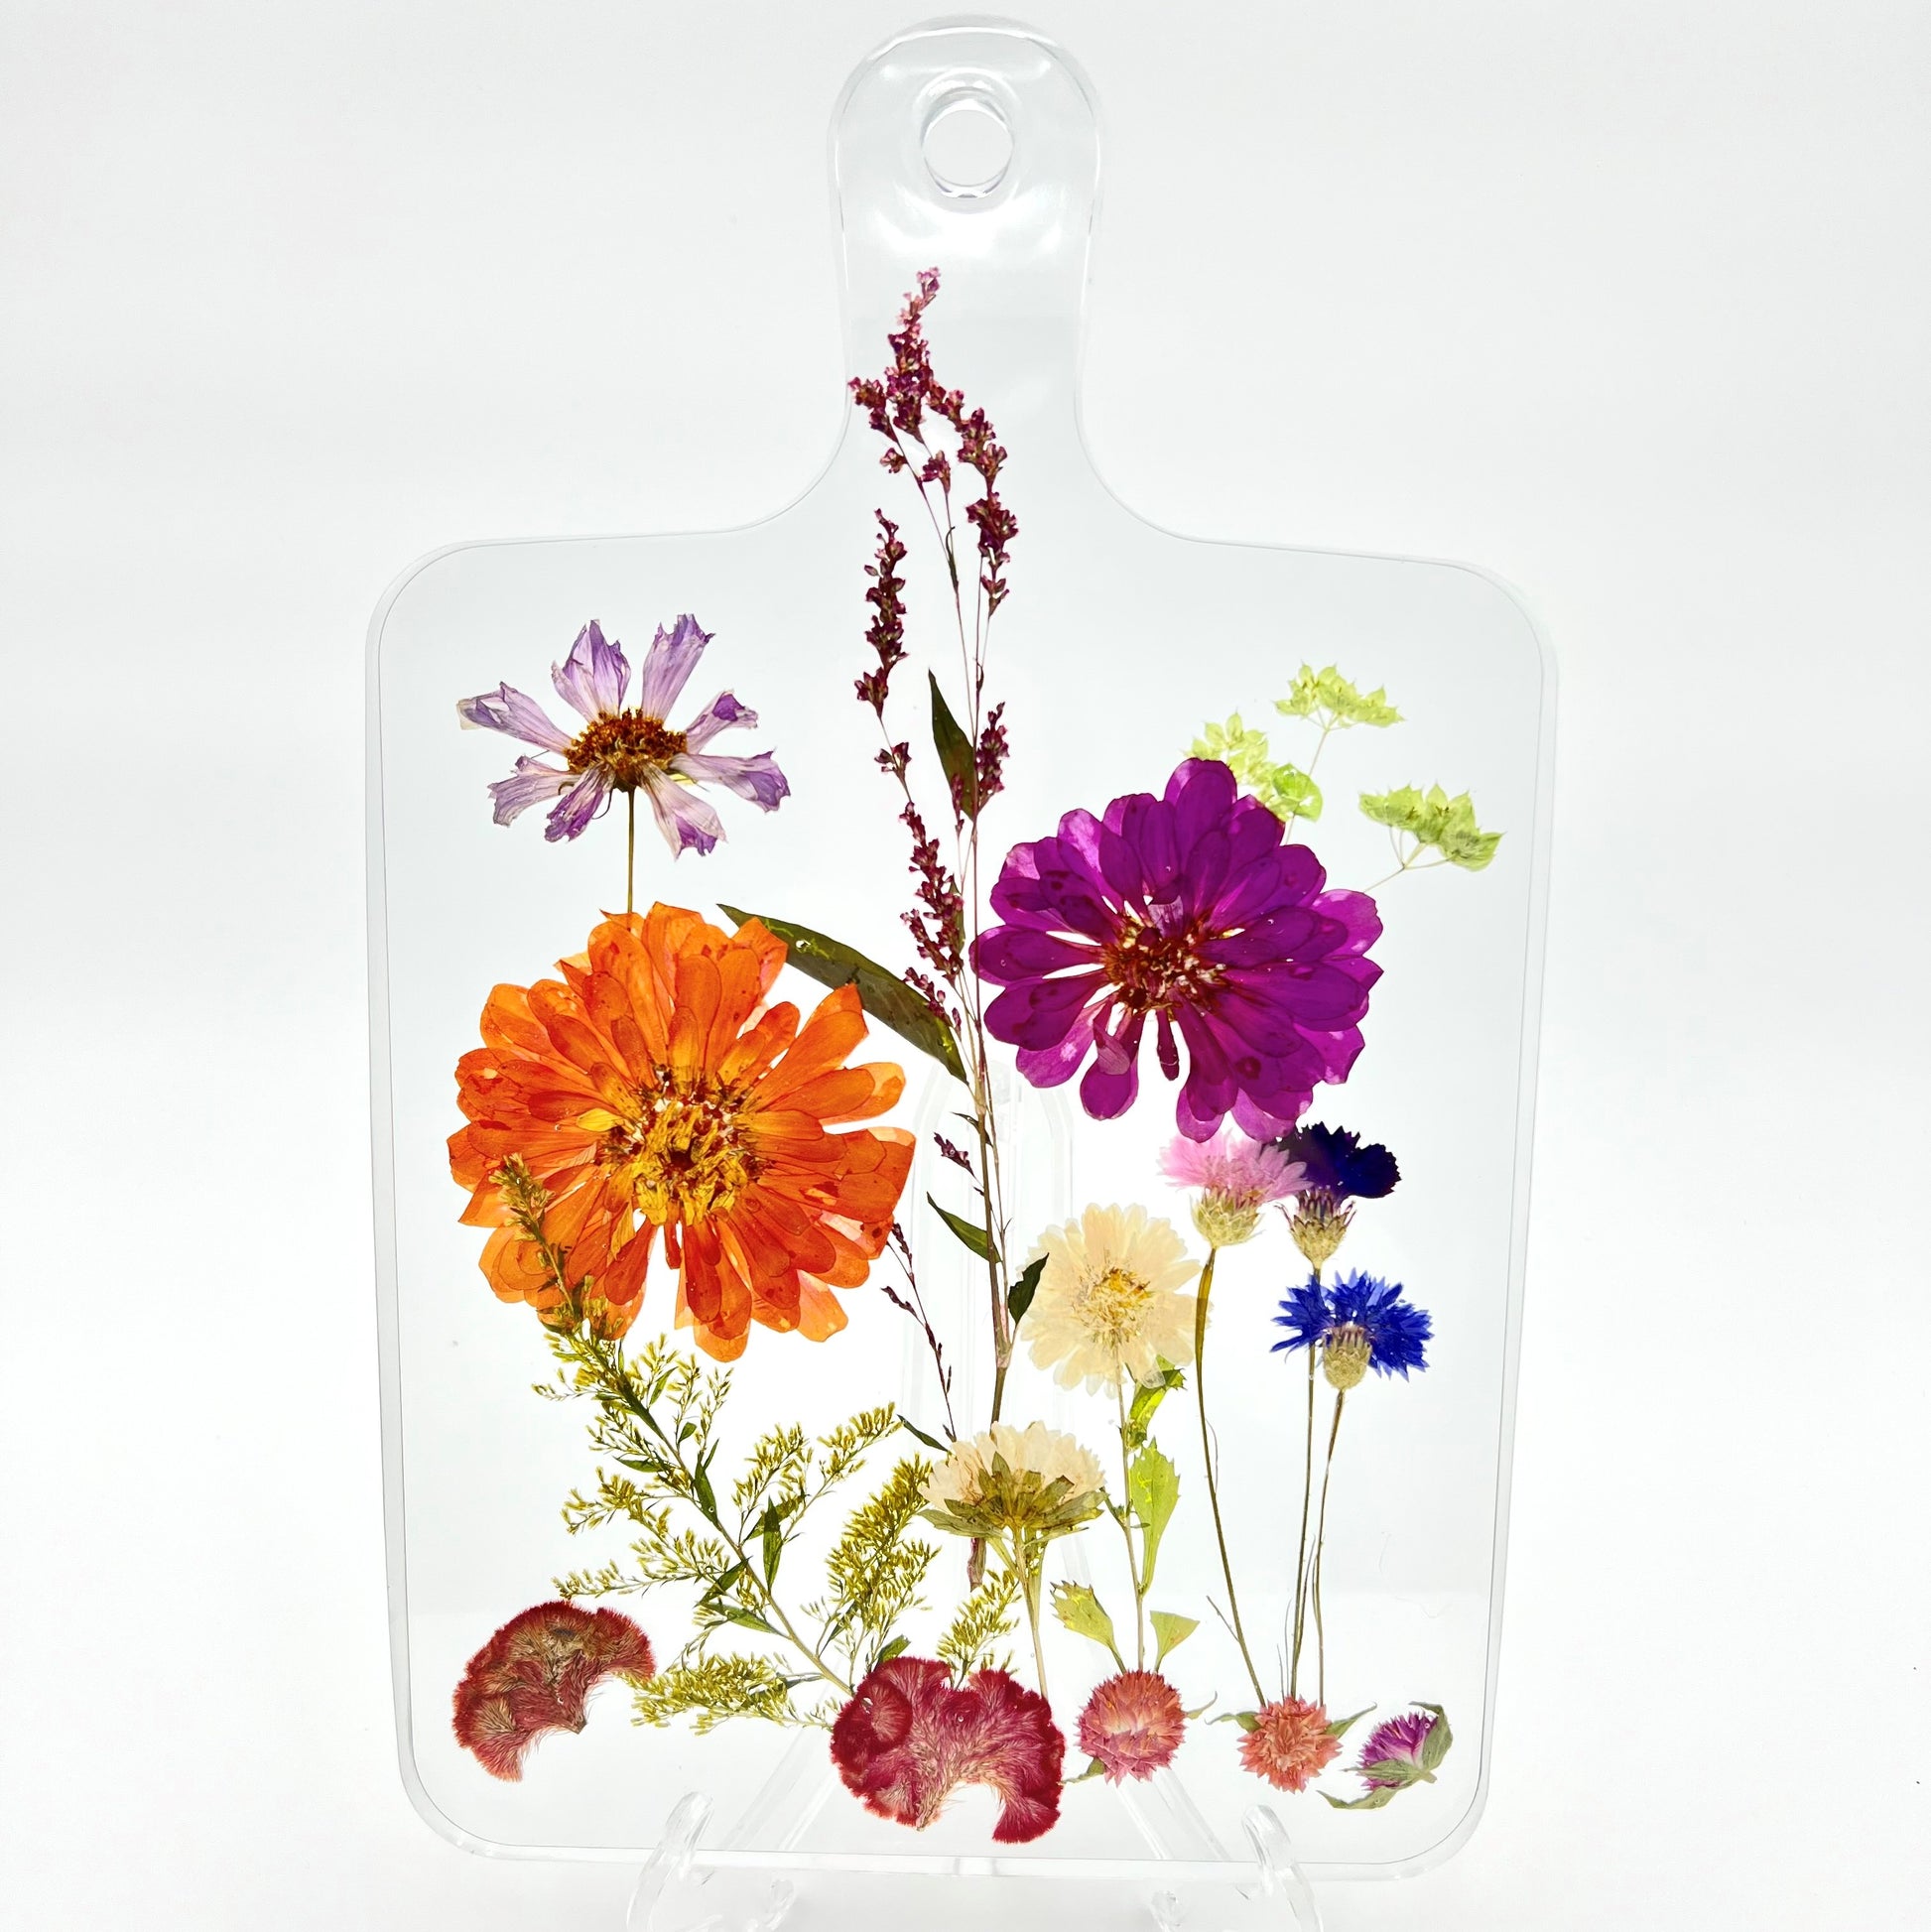 DIY Resin and Dried Flowers: Learn how to make Coasters, Trays